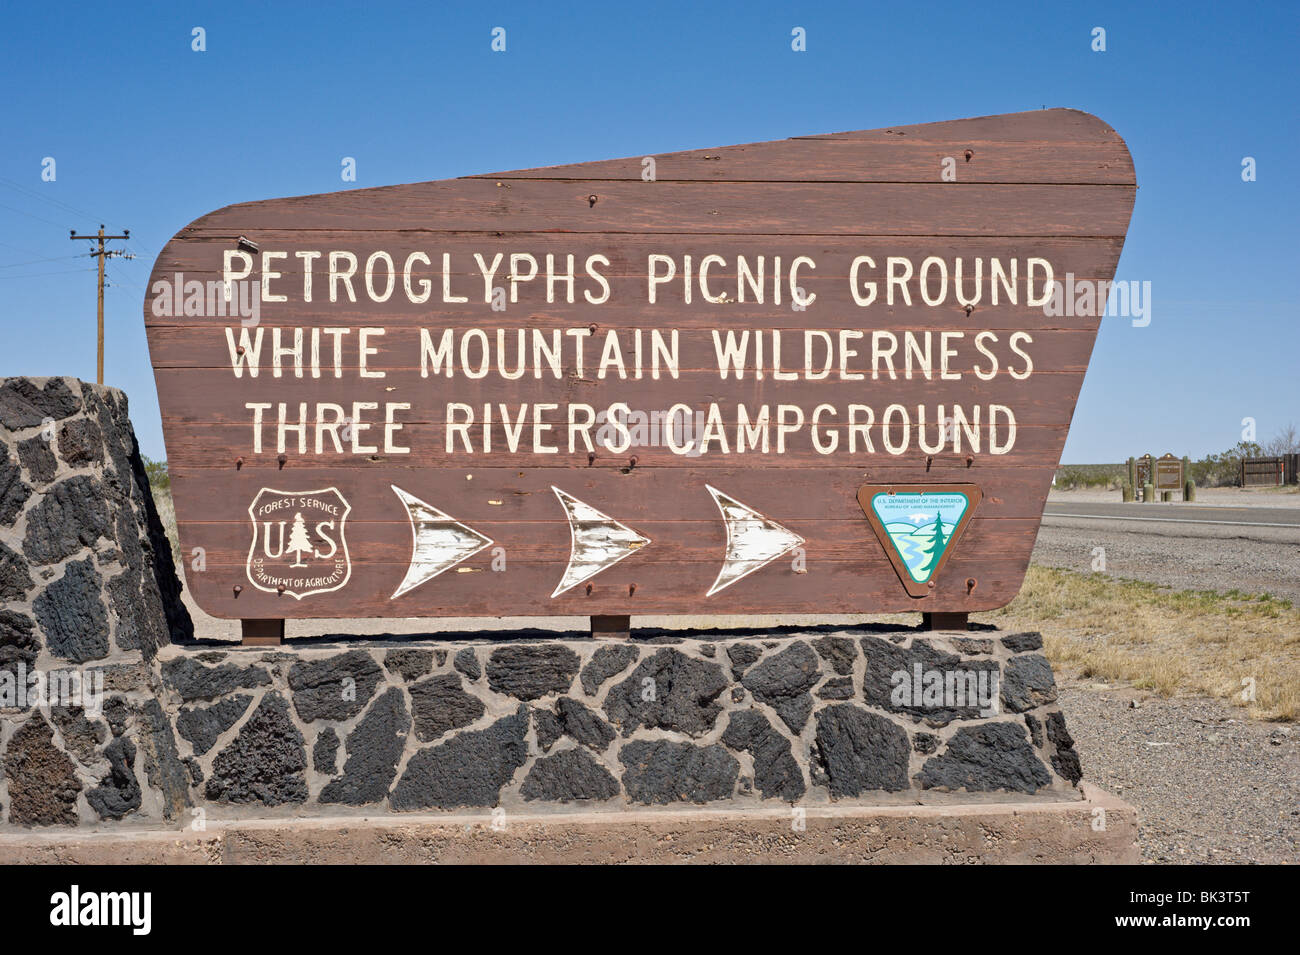 Sign for Petroglyphs Picnic Ground, White Mountain Wilderness, and Three Rivers Campground, New Mexico. Stock Photo